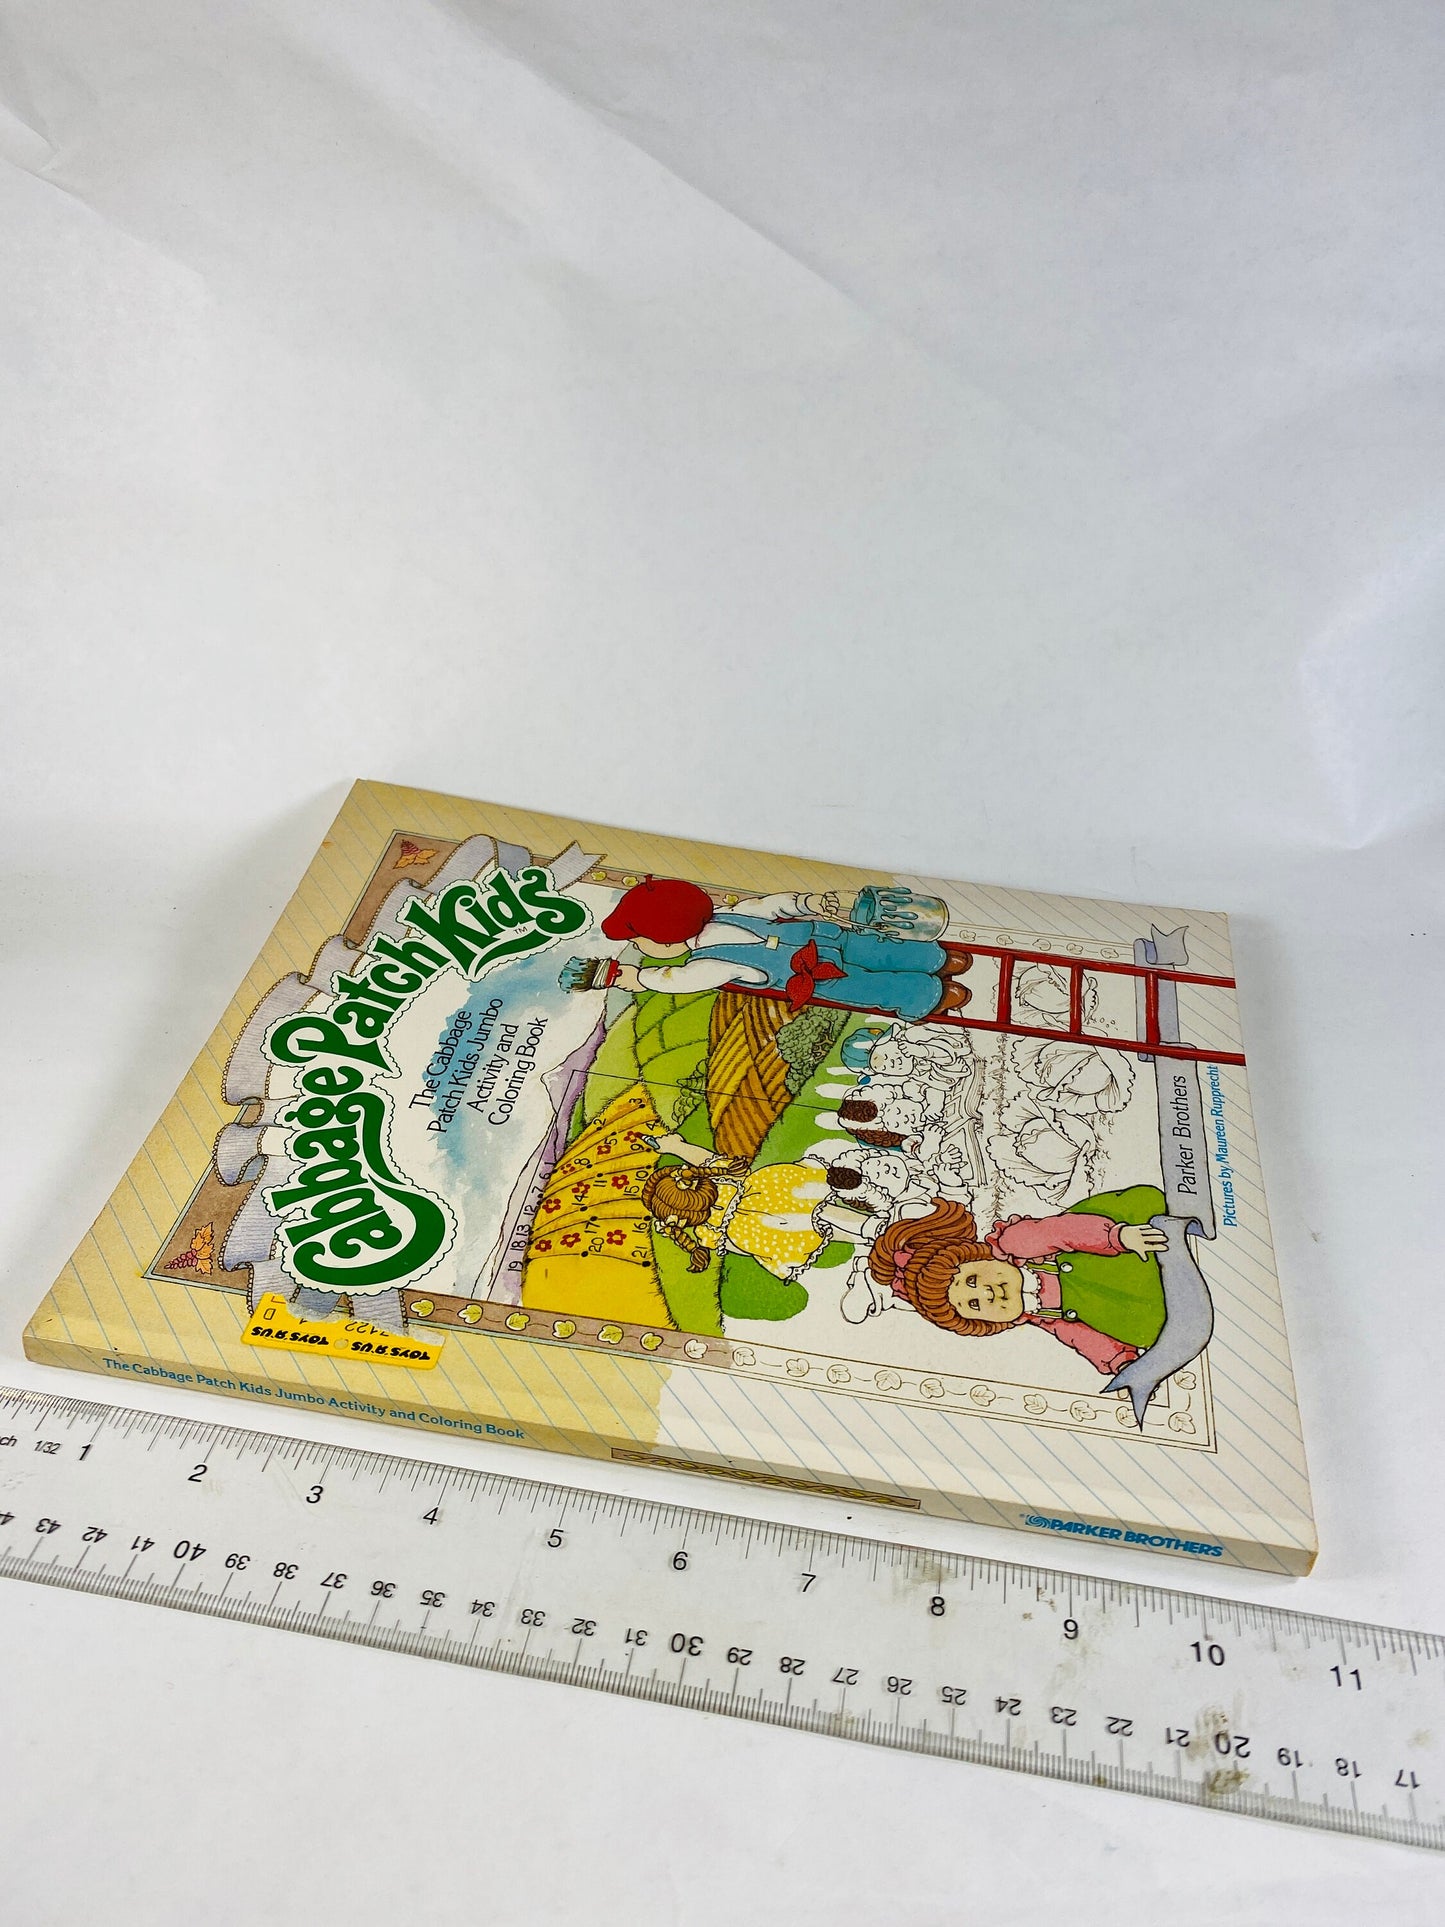 1983 Cabbage Patch Kids Coloring Book Vintage activity book for children from the 1980s with some pages colored. Parker Brothers